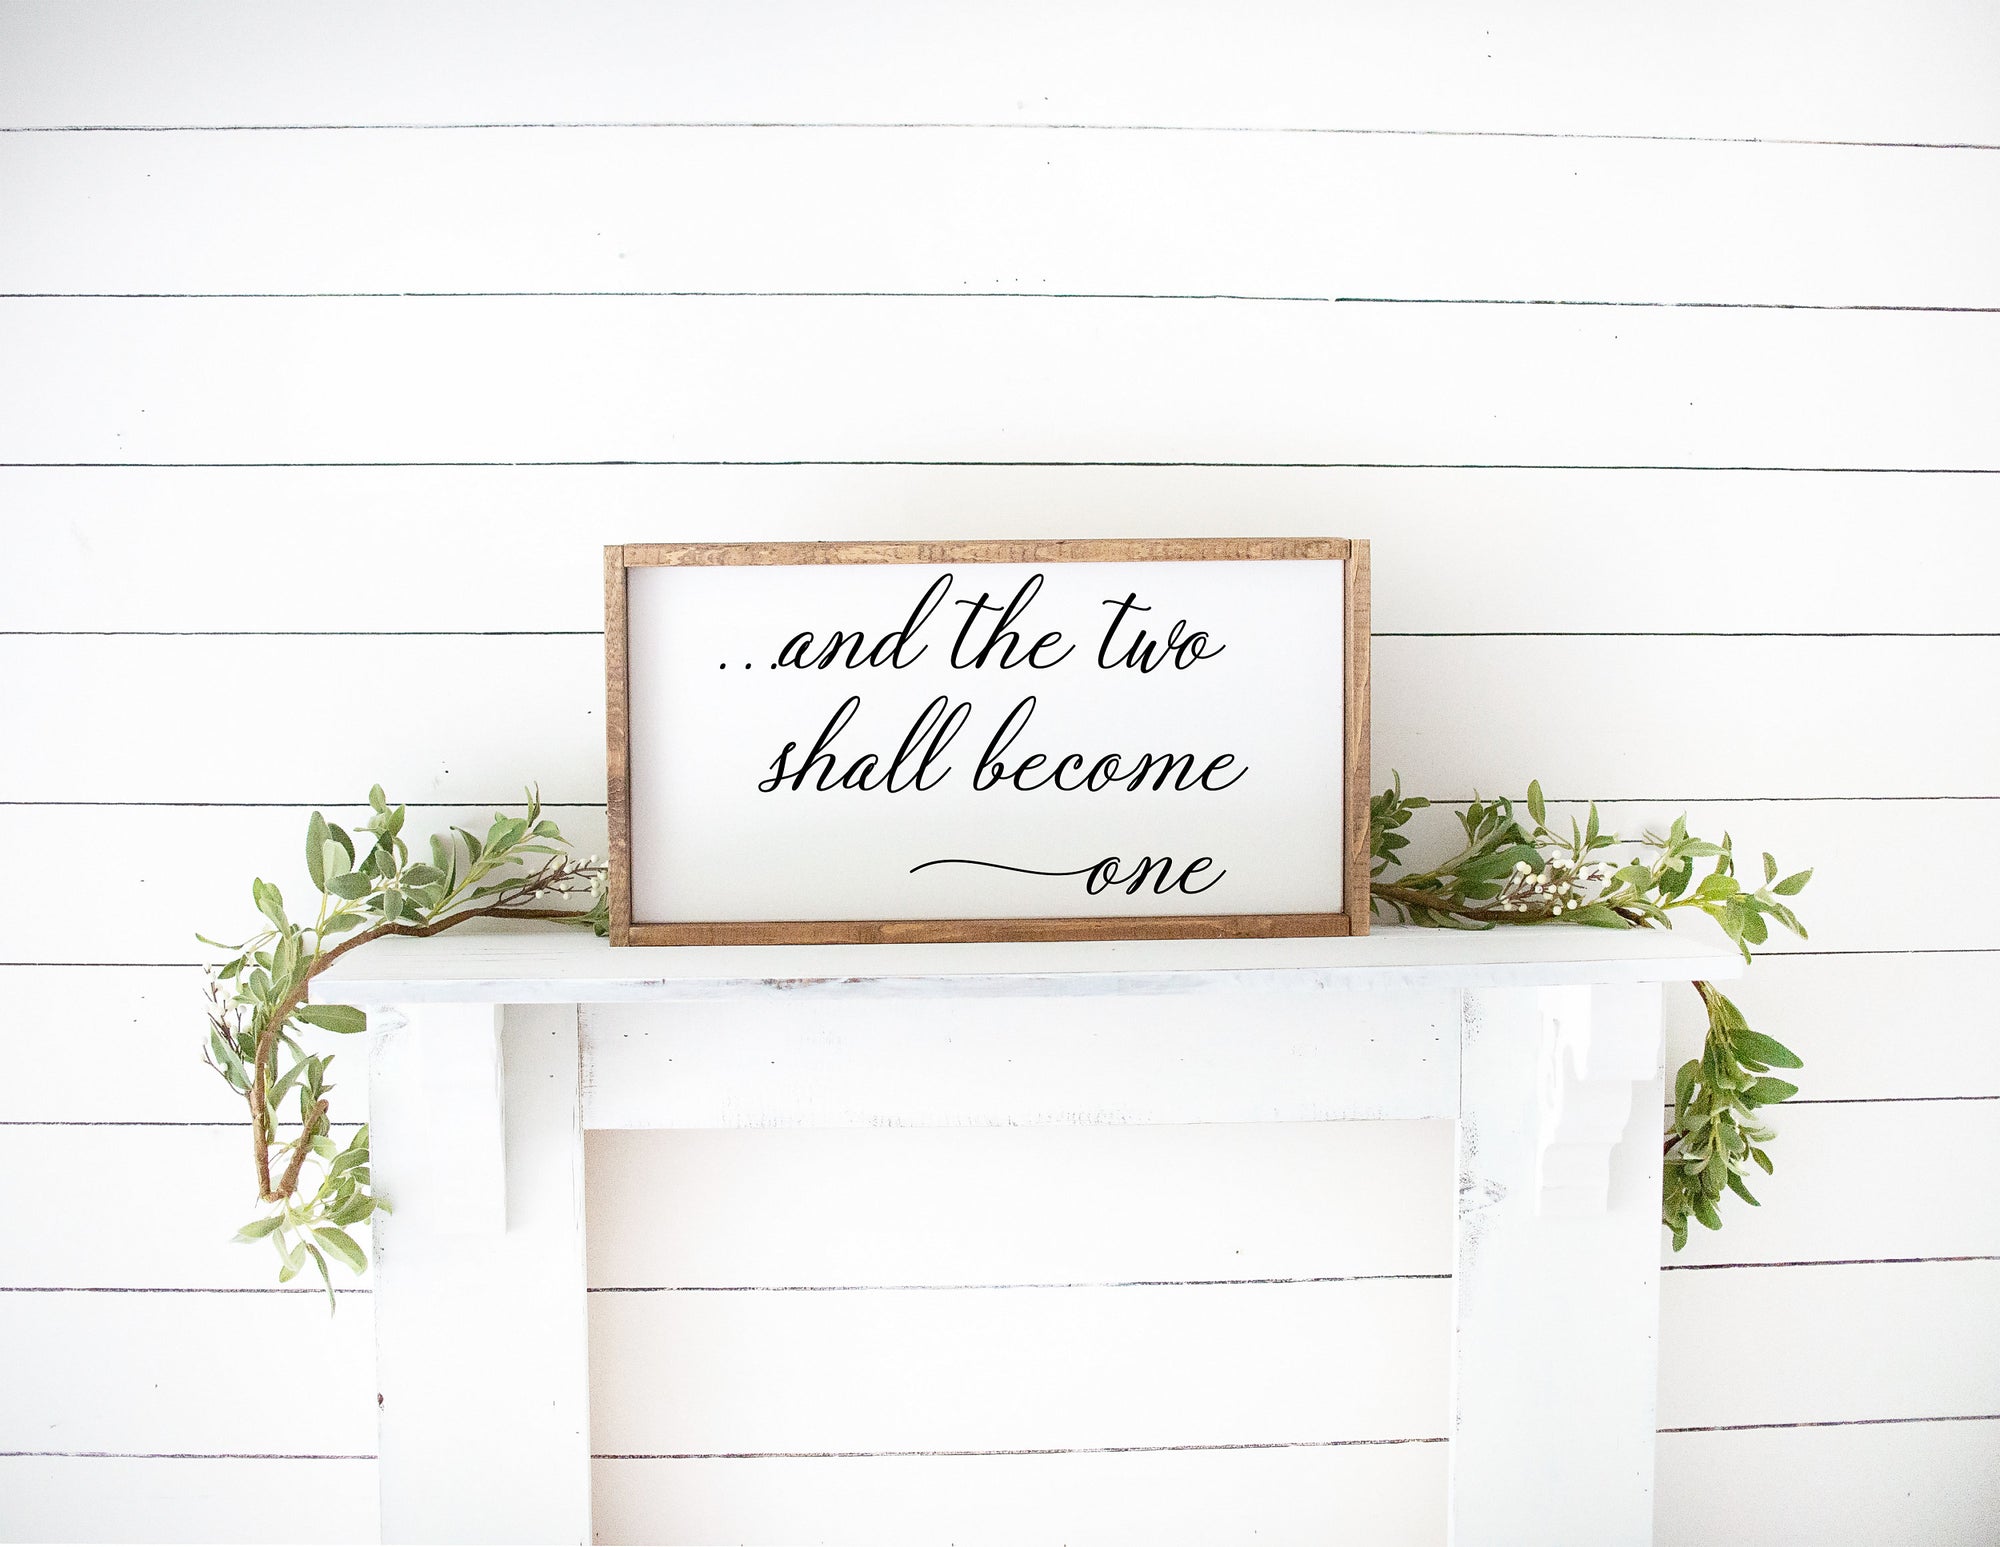 Wedding Framed White And The Two Shall Become One Sign Bedroom Wall Decor, Rustic Farmhouse Wall Decor, Anniversary Wedding Gift